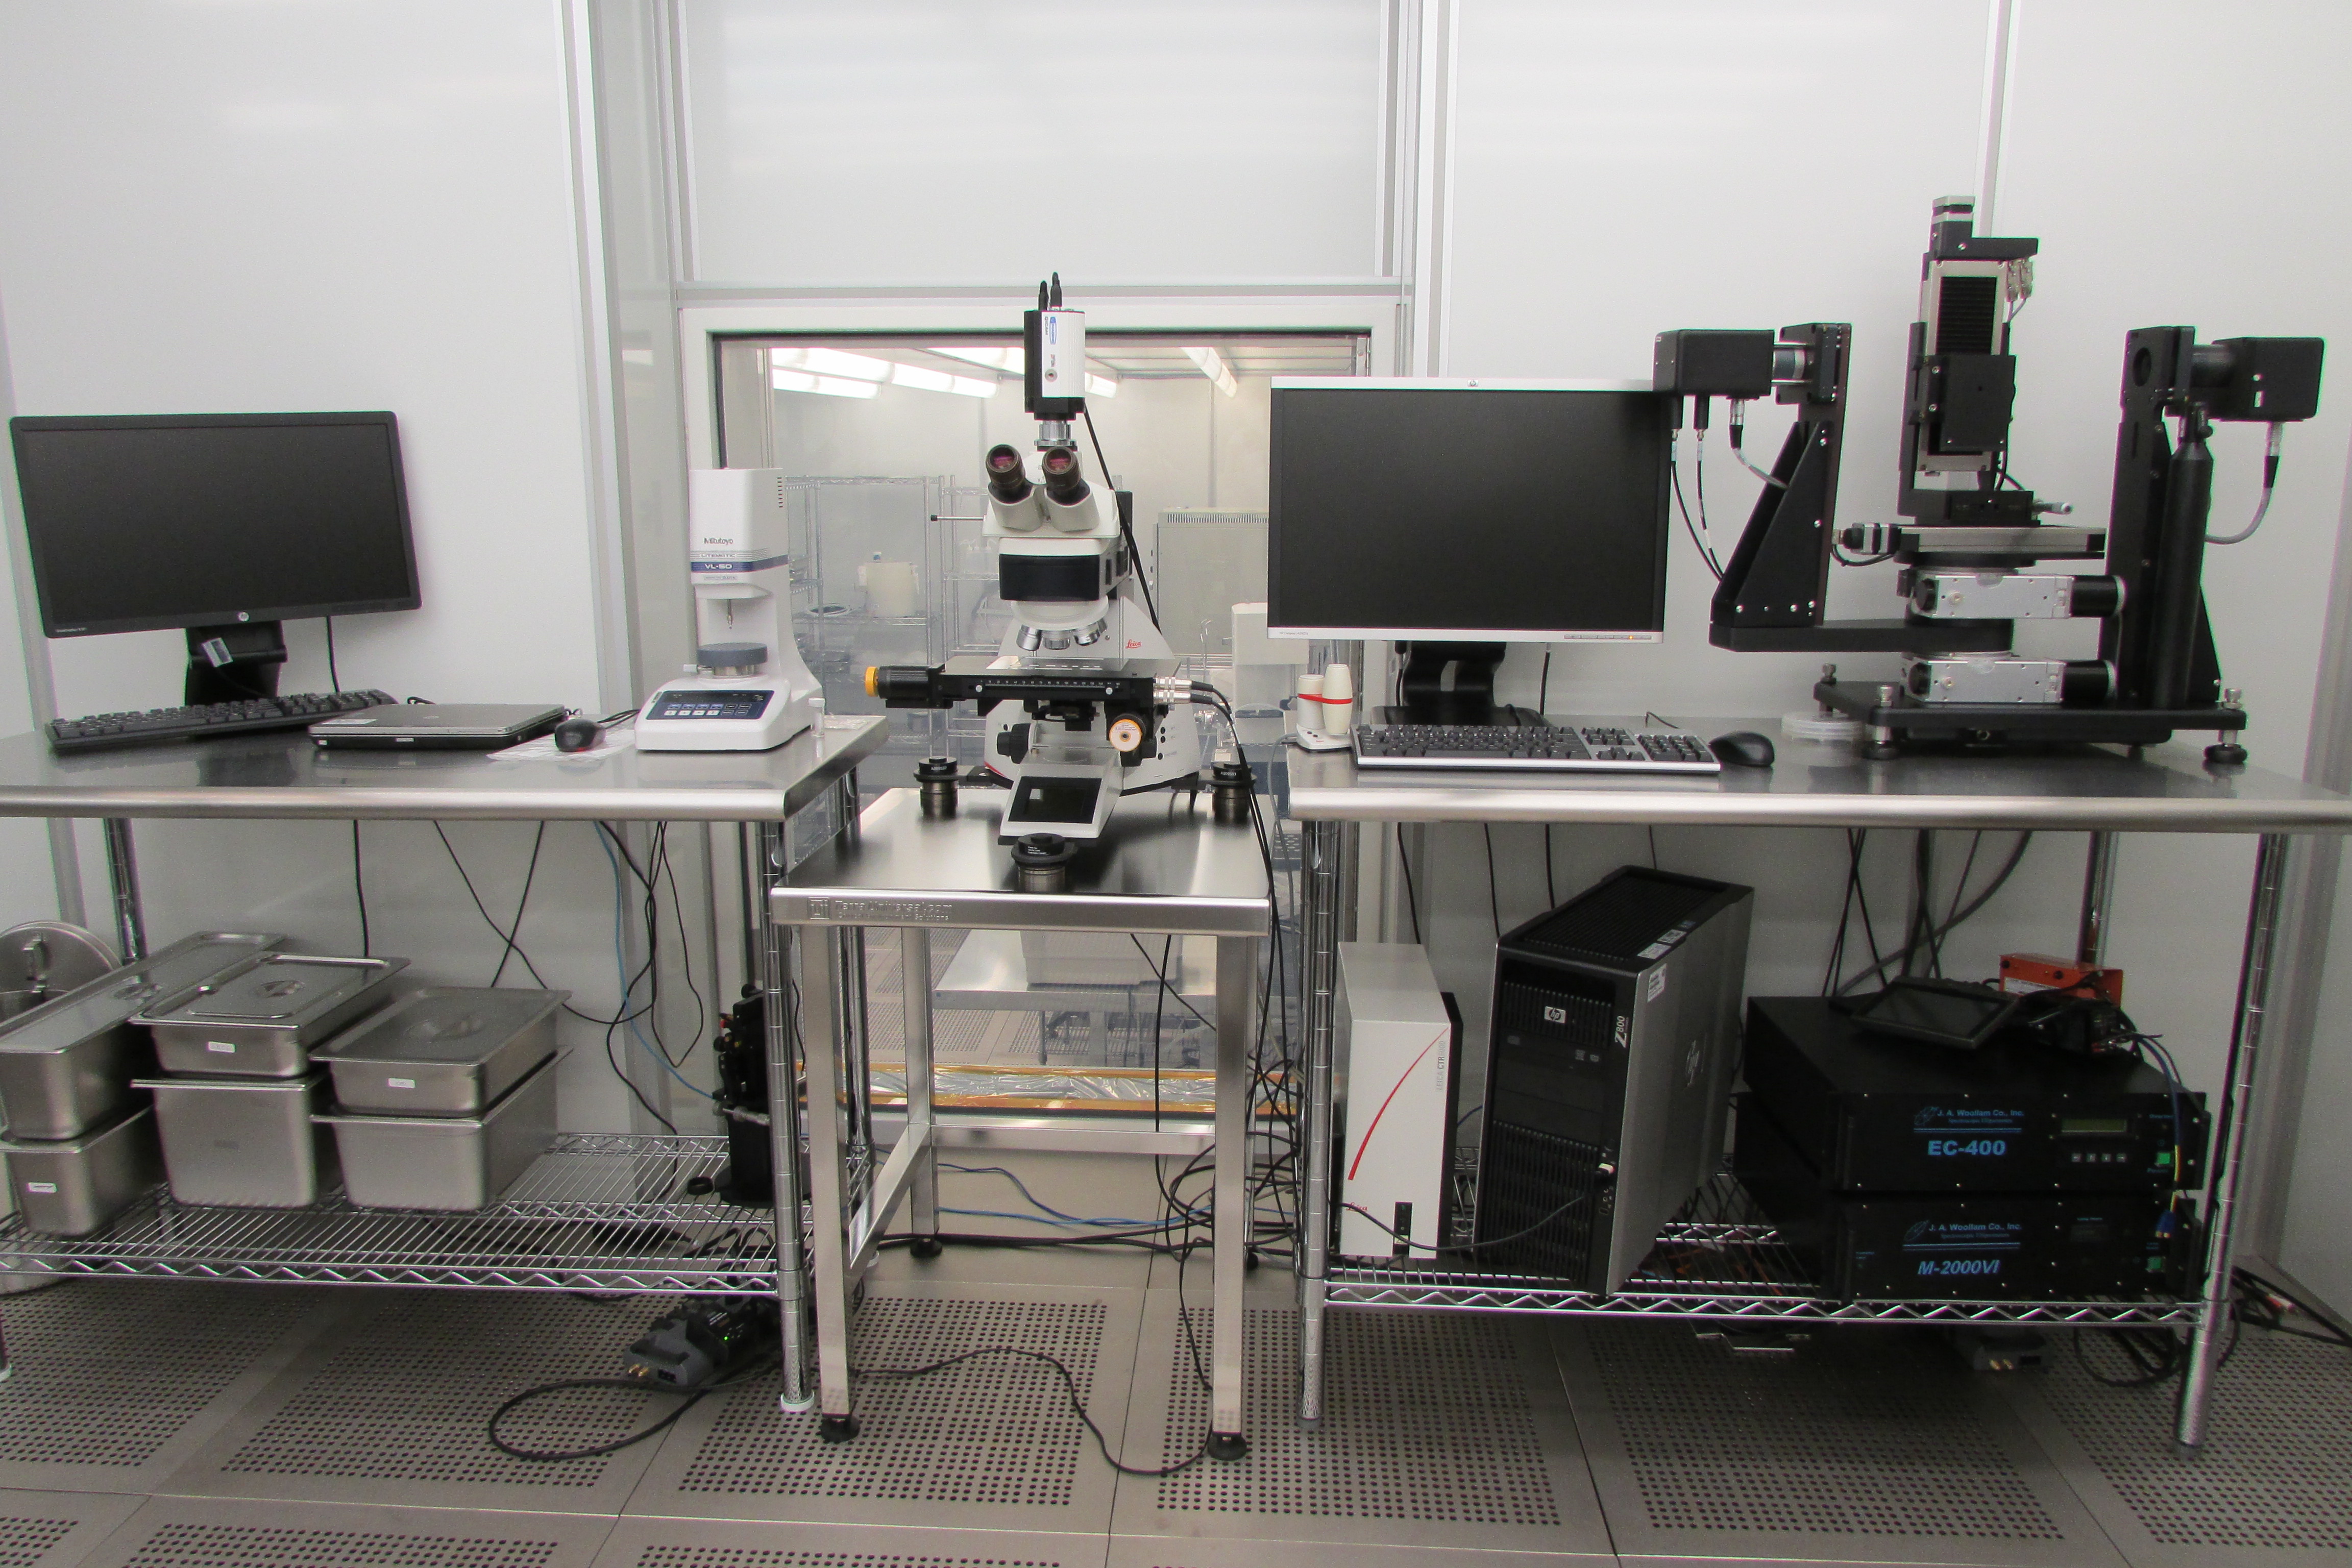 Digimatic Indicator, Automated Microscope and Spectroscopic Ellipsometer used for sample characterization